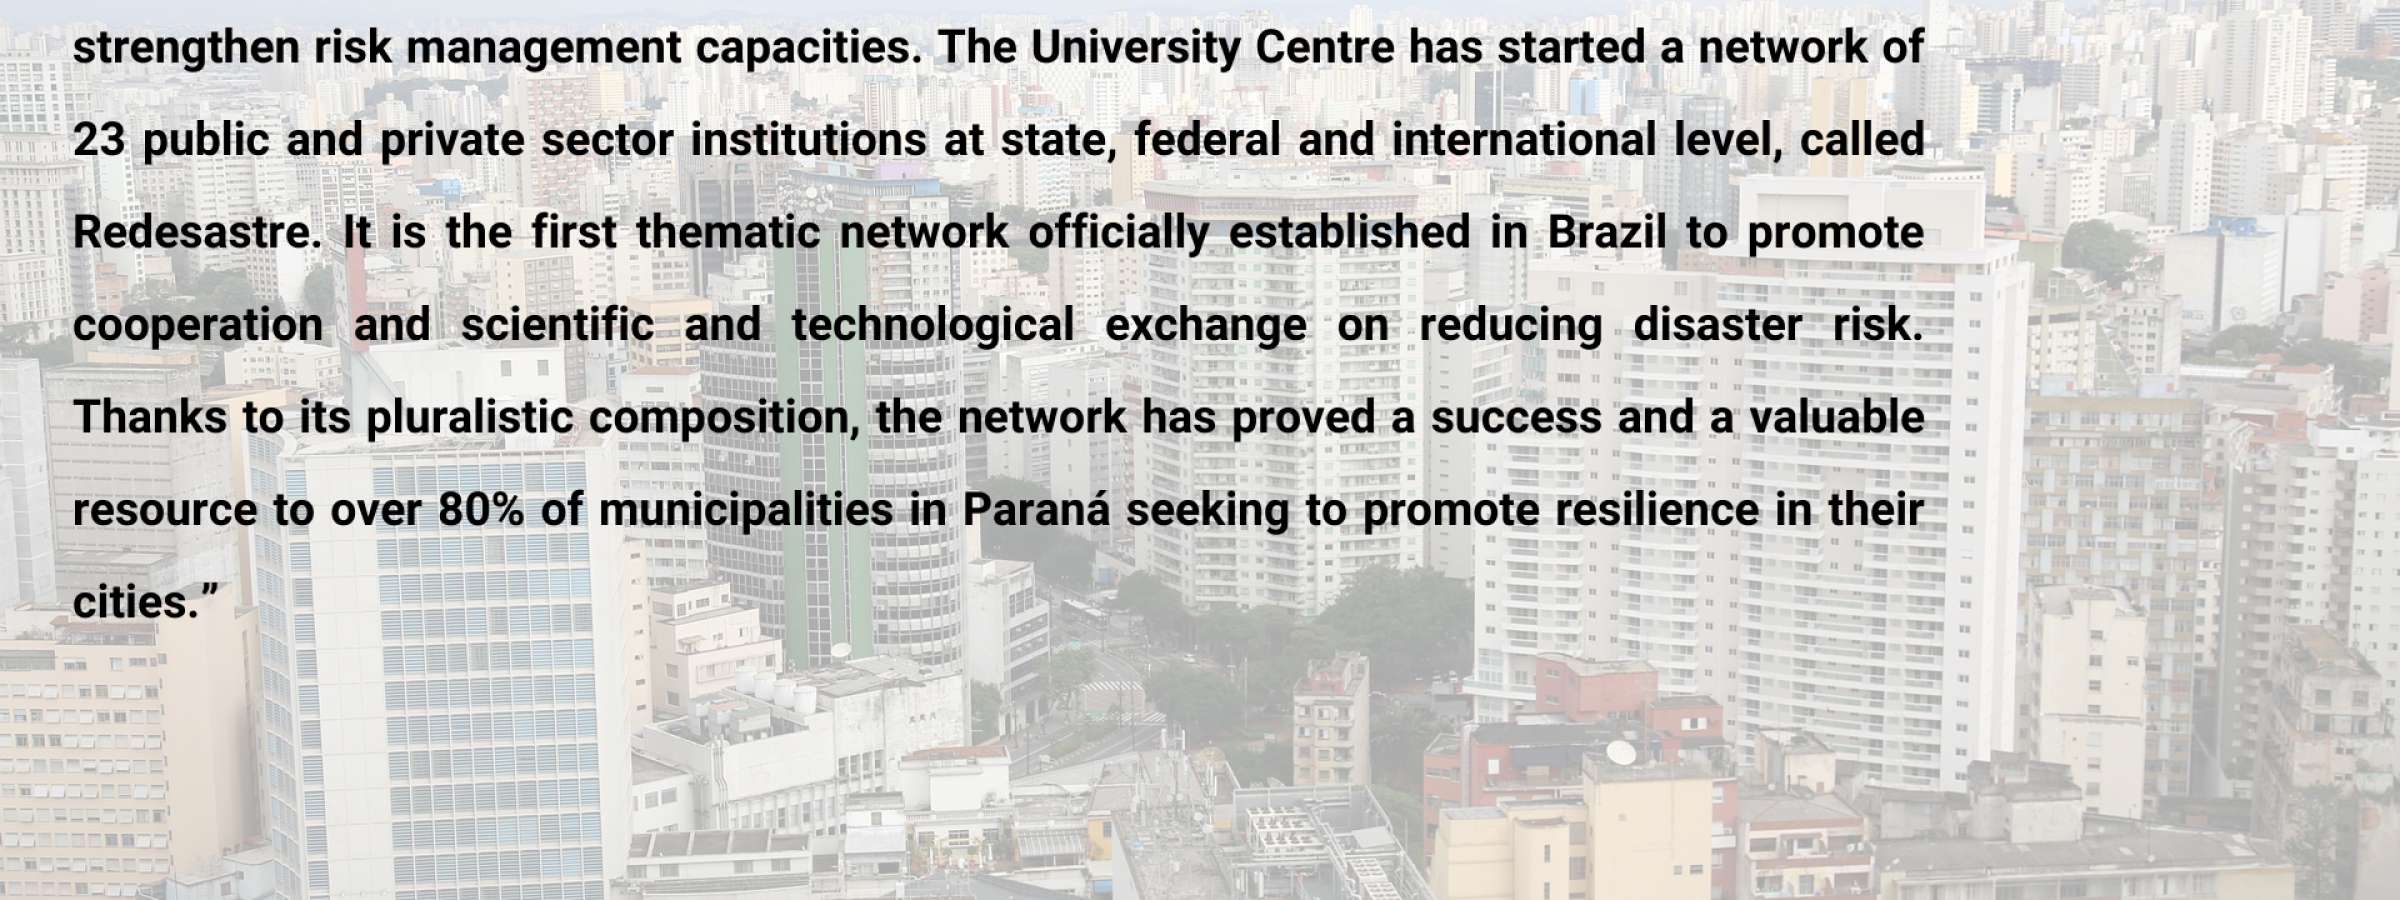 In the municipalities of Paraná in Brazil, the University Center for Studies and Research on Disasters has promoted the Making Cities Resilient (MCR) Campaign as a means to strengthen risk management capacities.